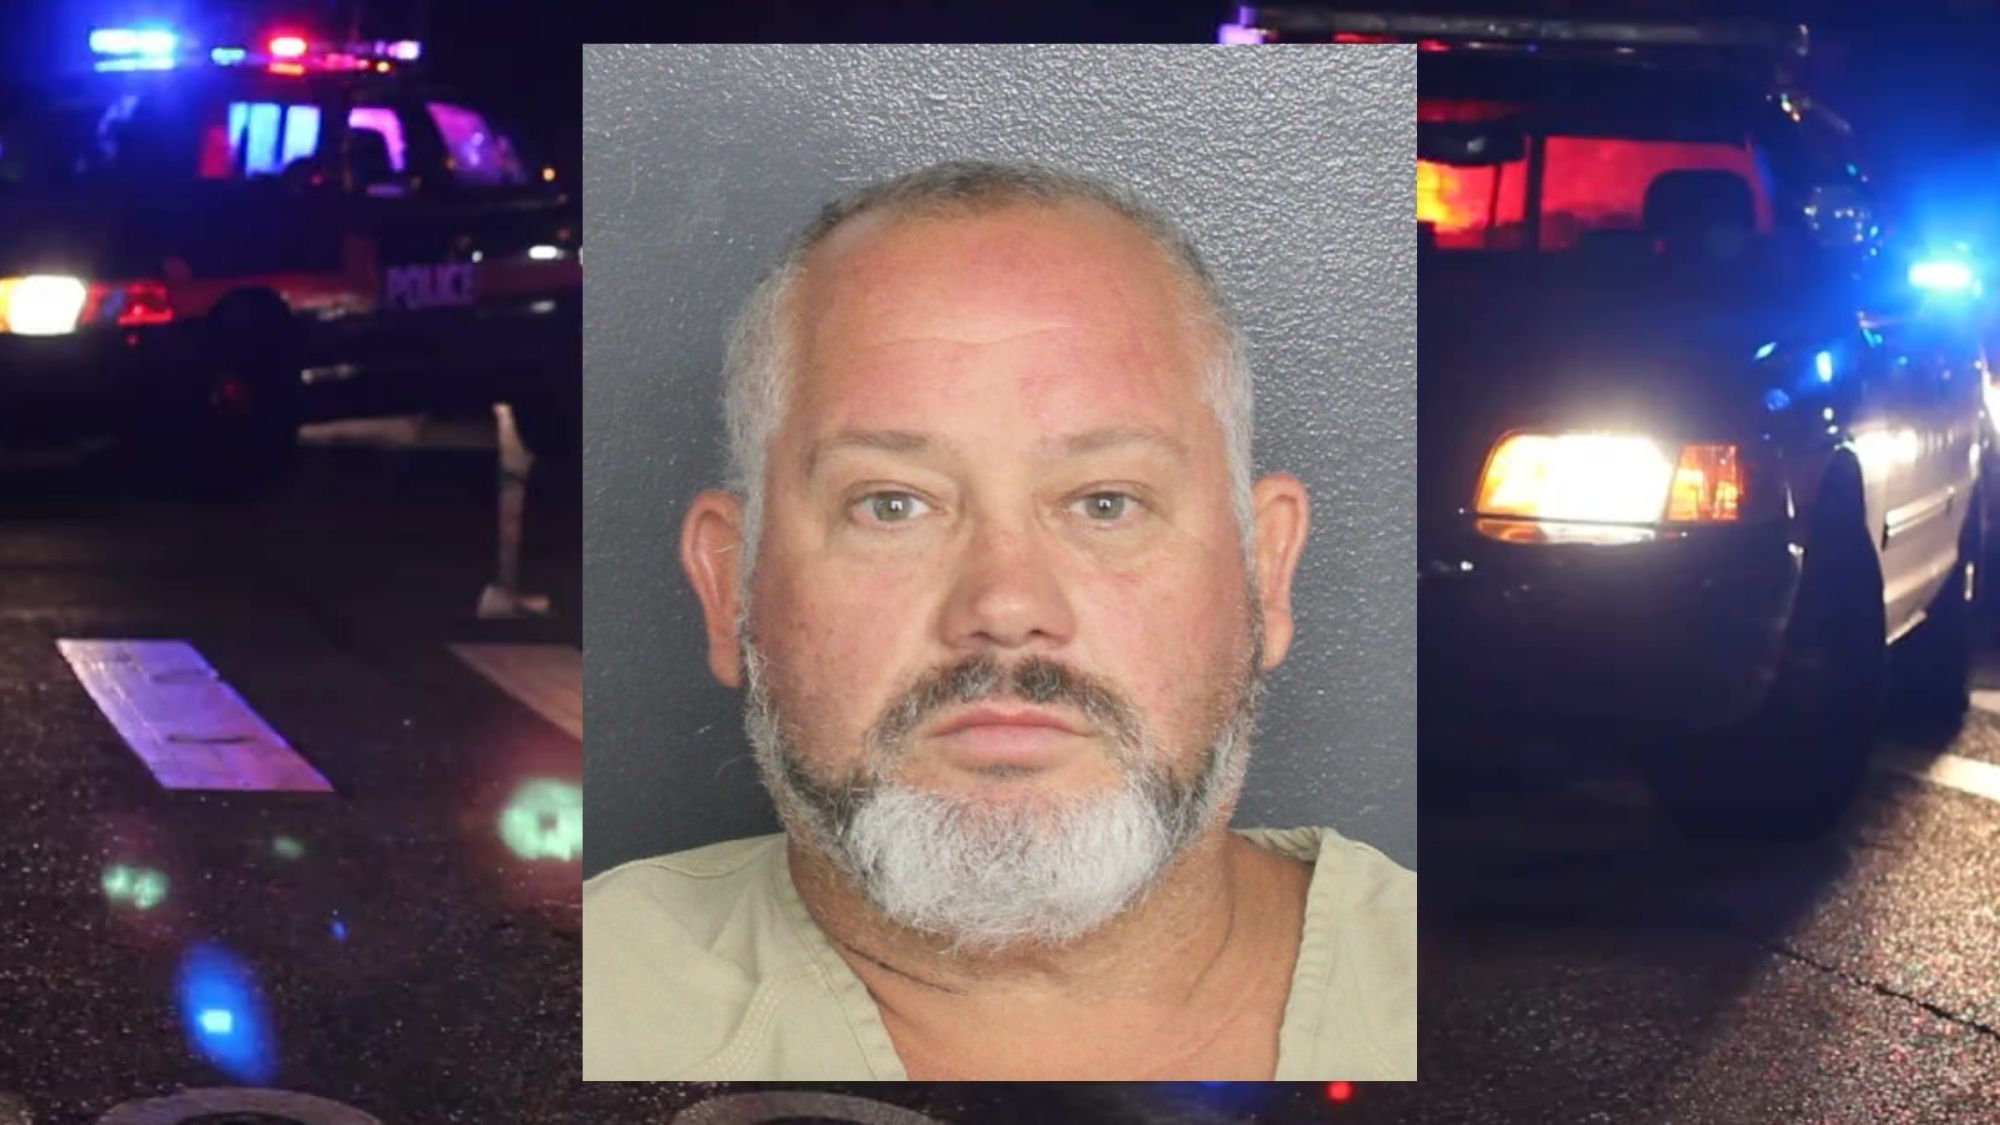 Coral Springs man's 7-year Stretch of Sexual Abuse on Underage Victim Comes to an End with Arrest and Lockdown Scare